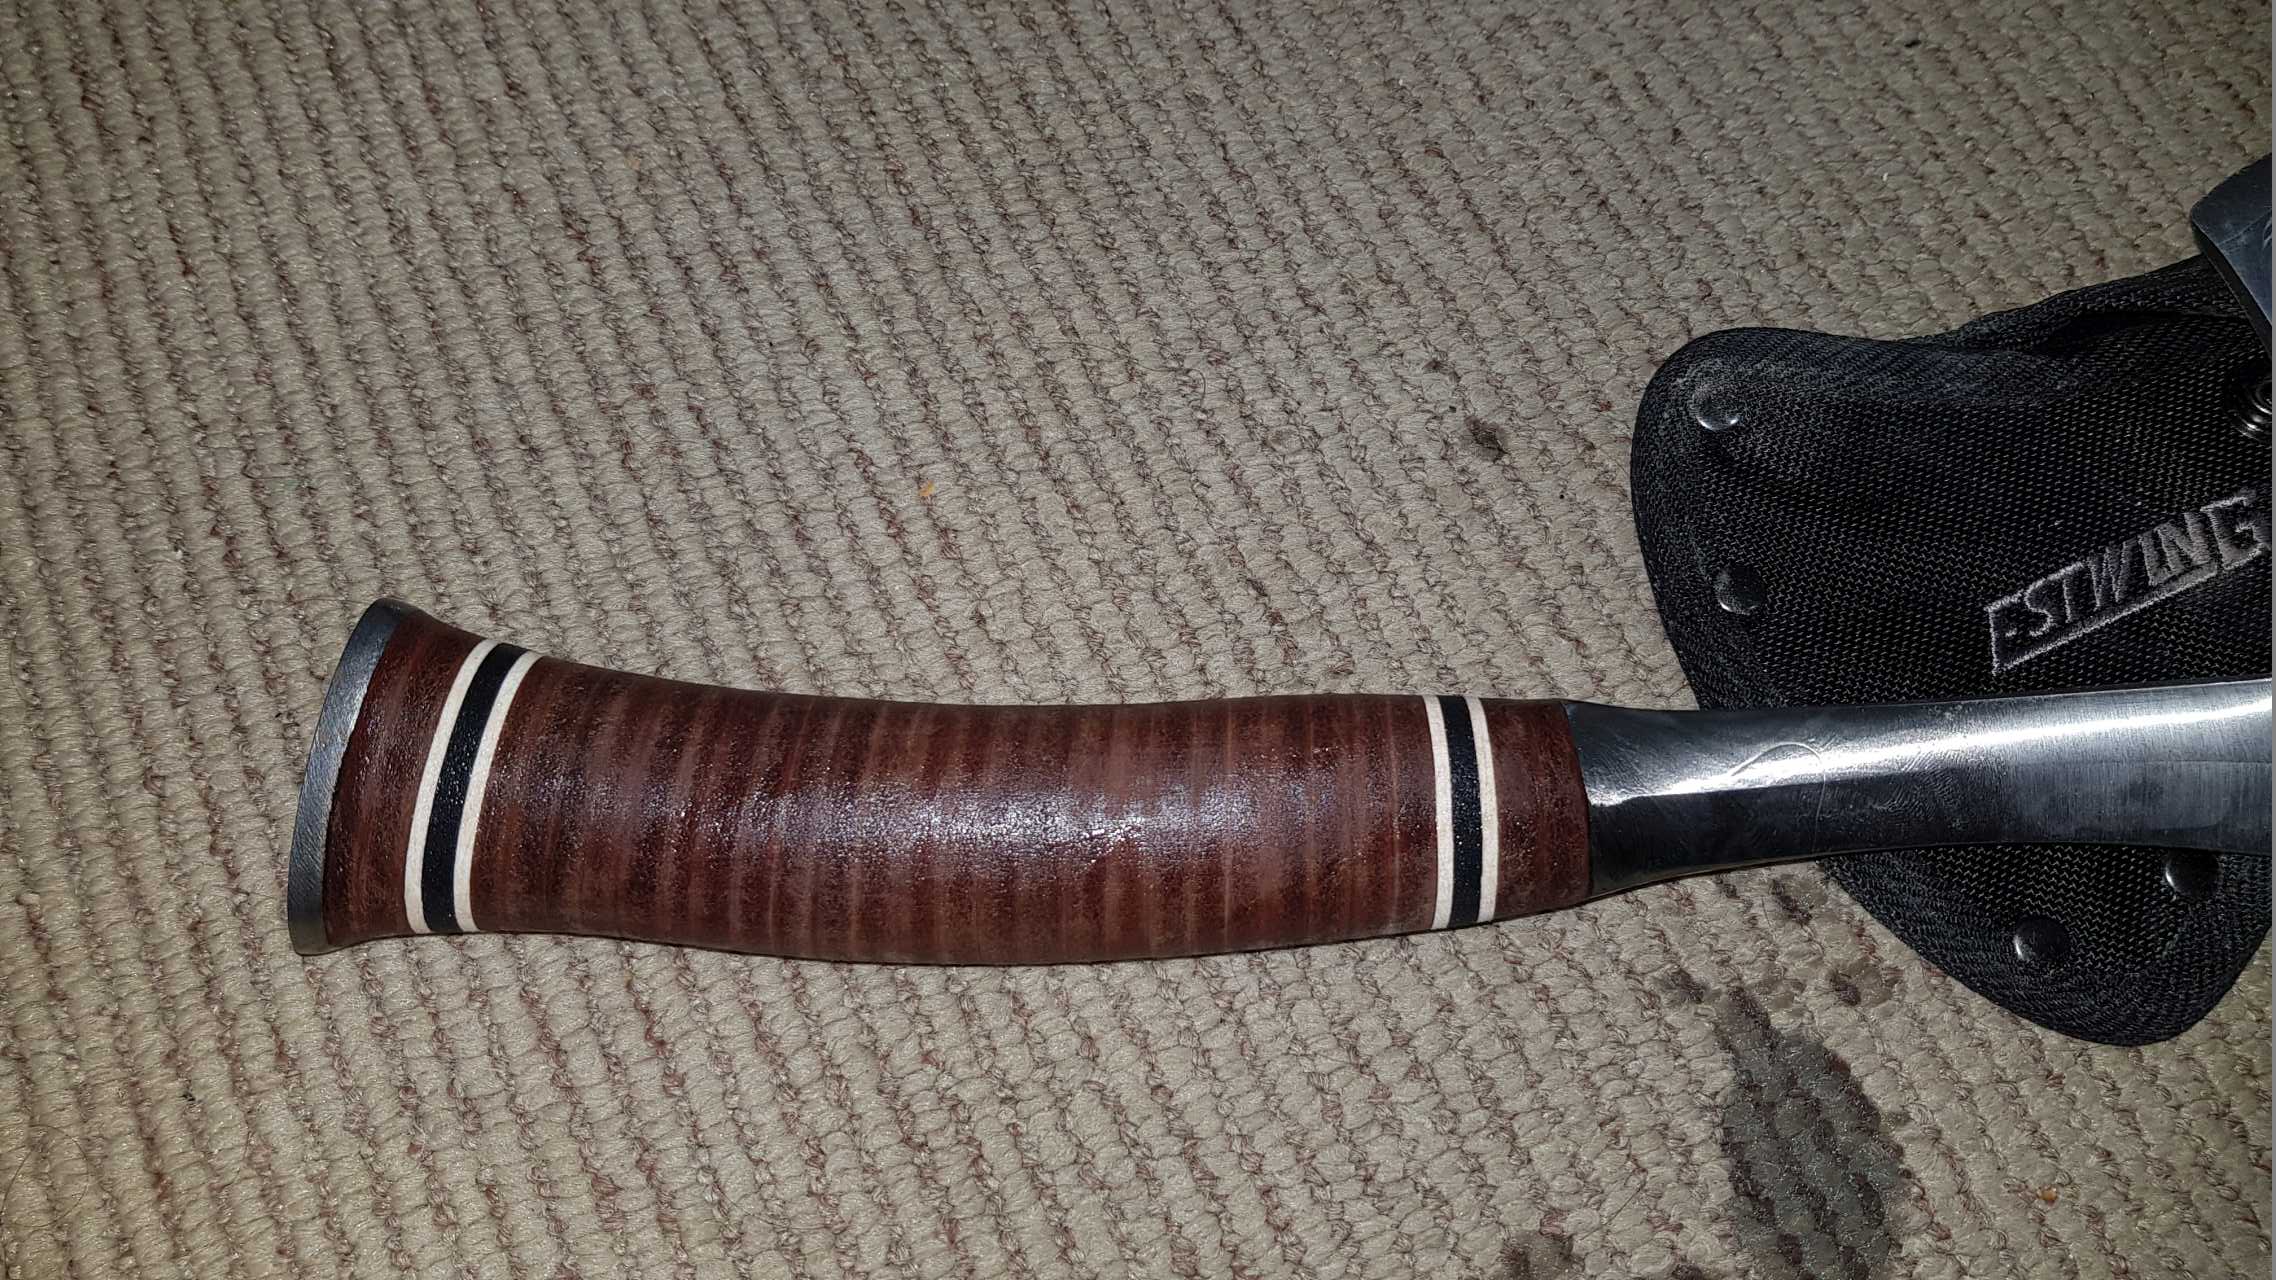 Estwing Axe Oiling